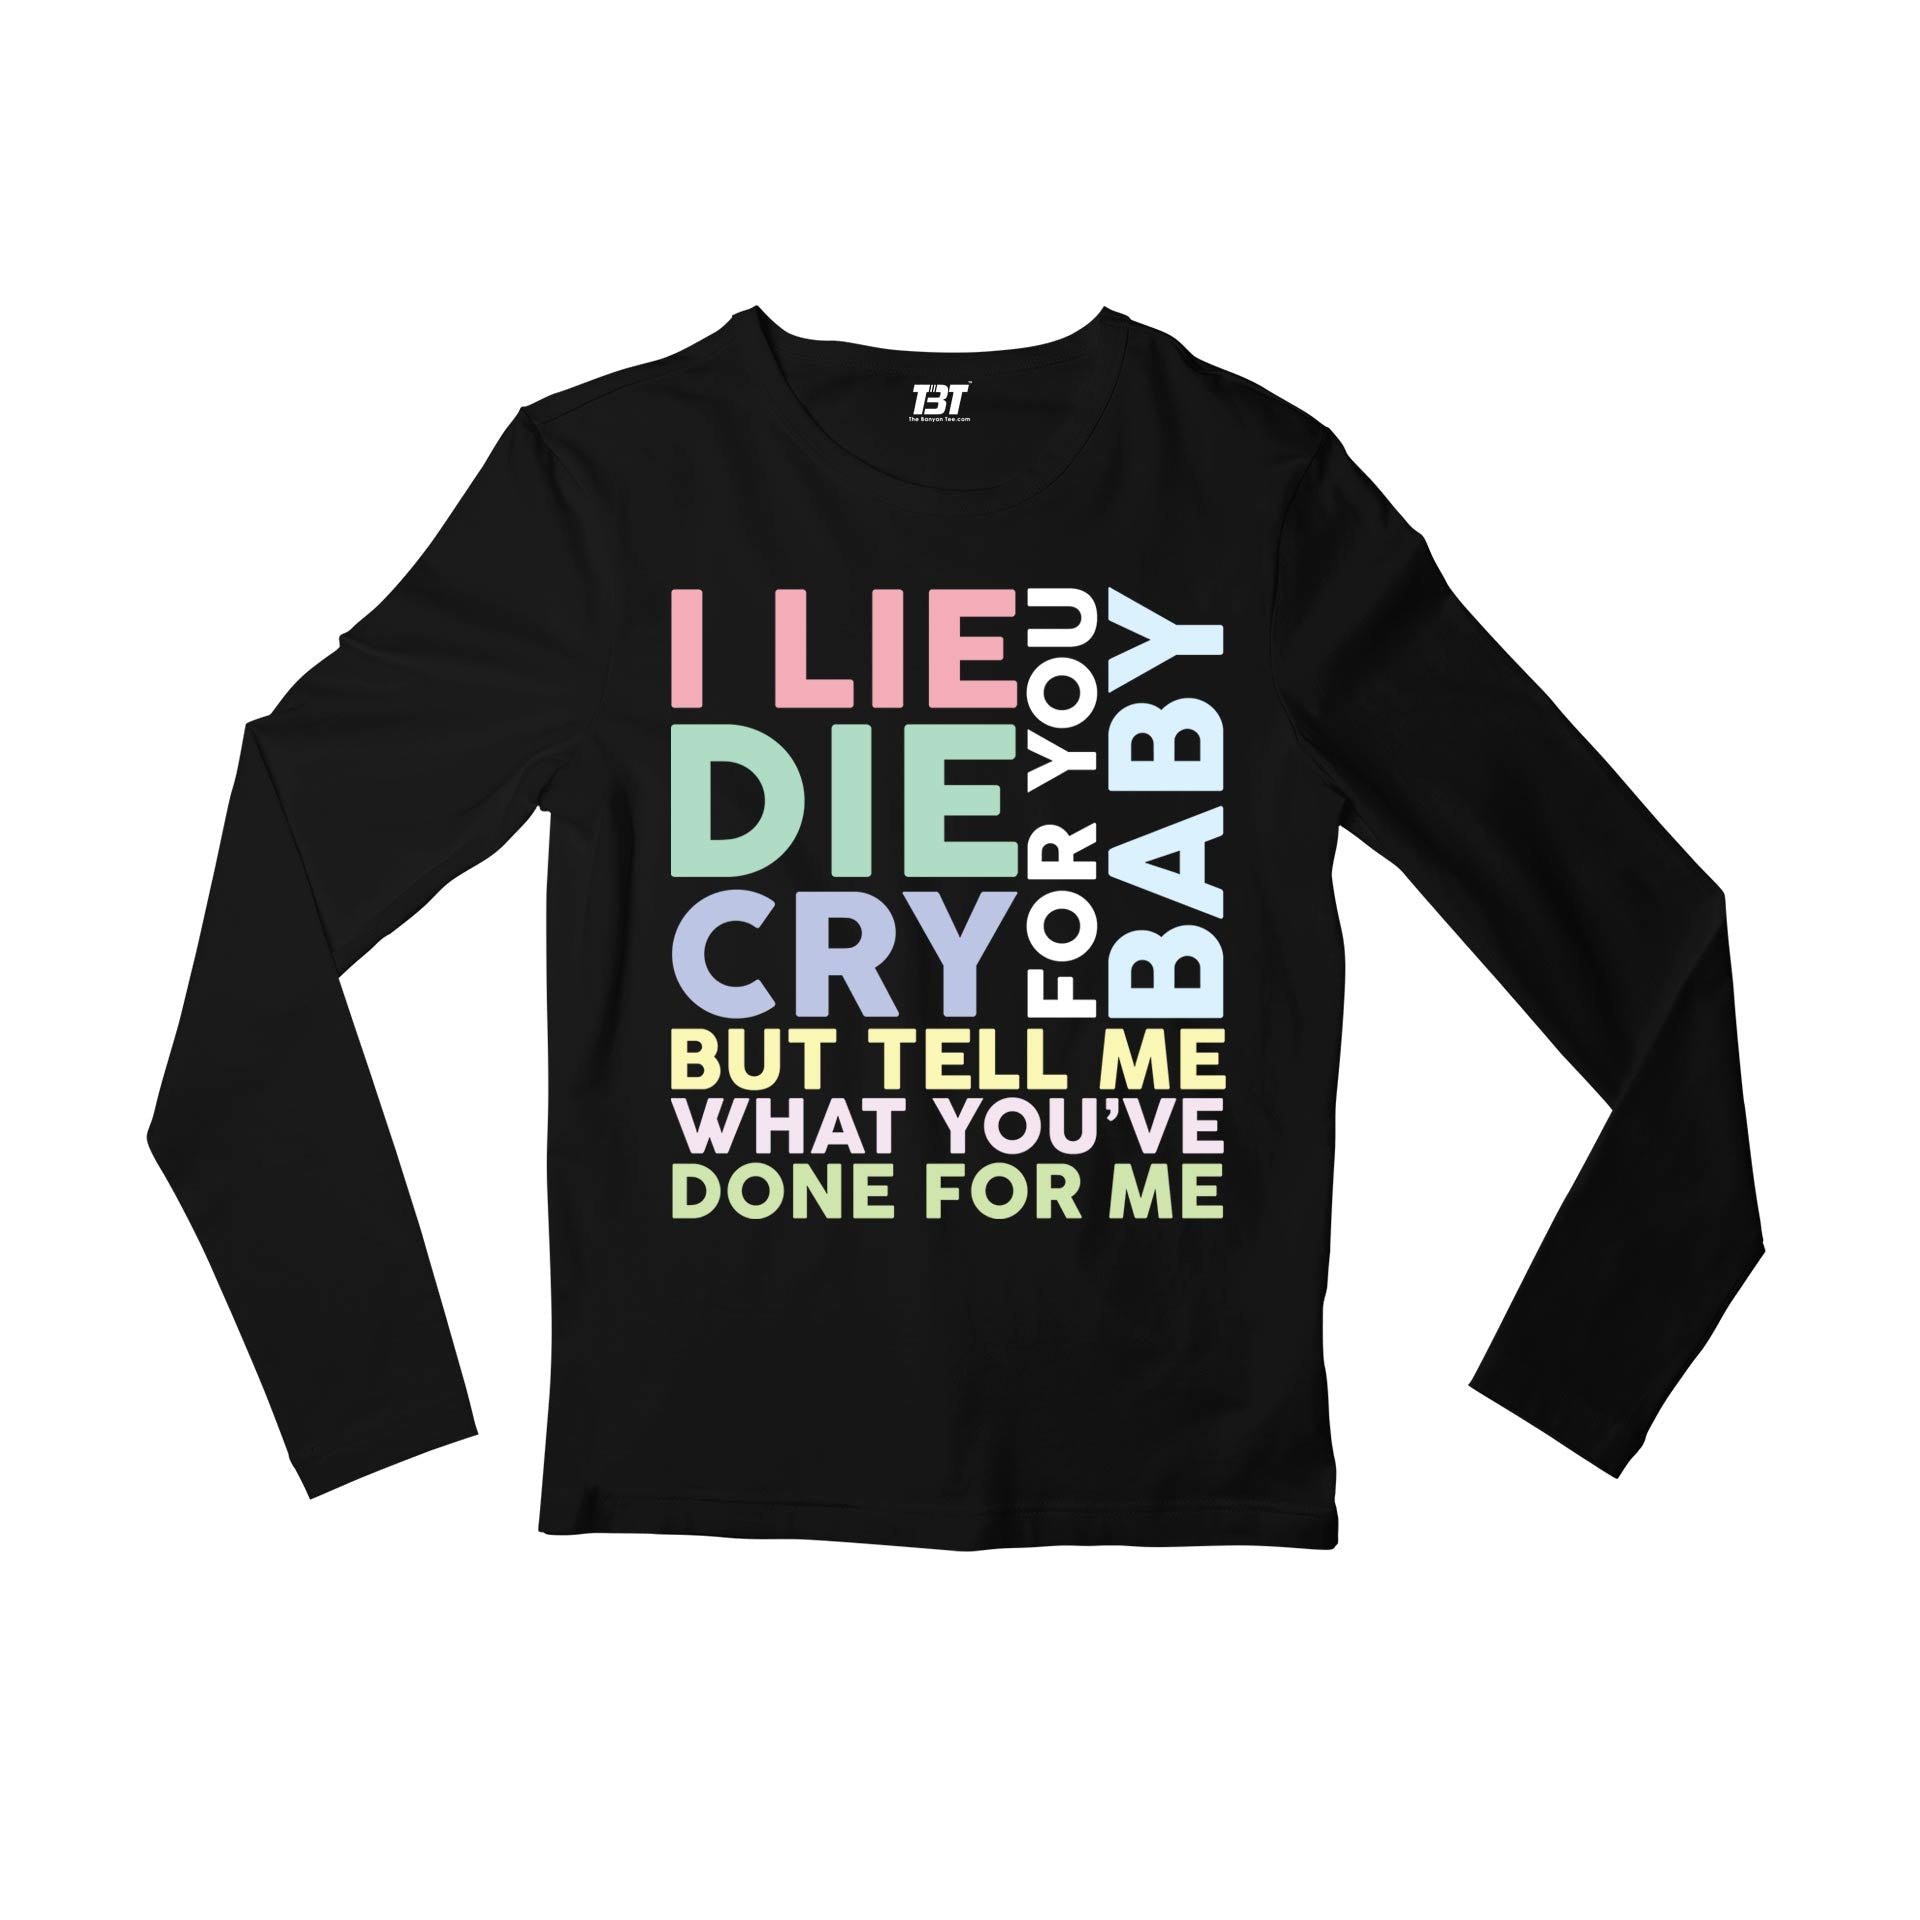 charlie puth done for me full sleeves long sleeves music band buy online india the banyan tee tbt men women girls boys unisex black i lie for you, baby die for you, baby cry for you, baby but tell me what you've done for me